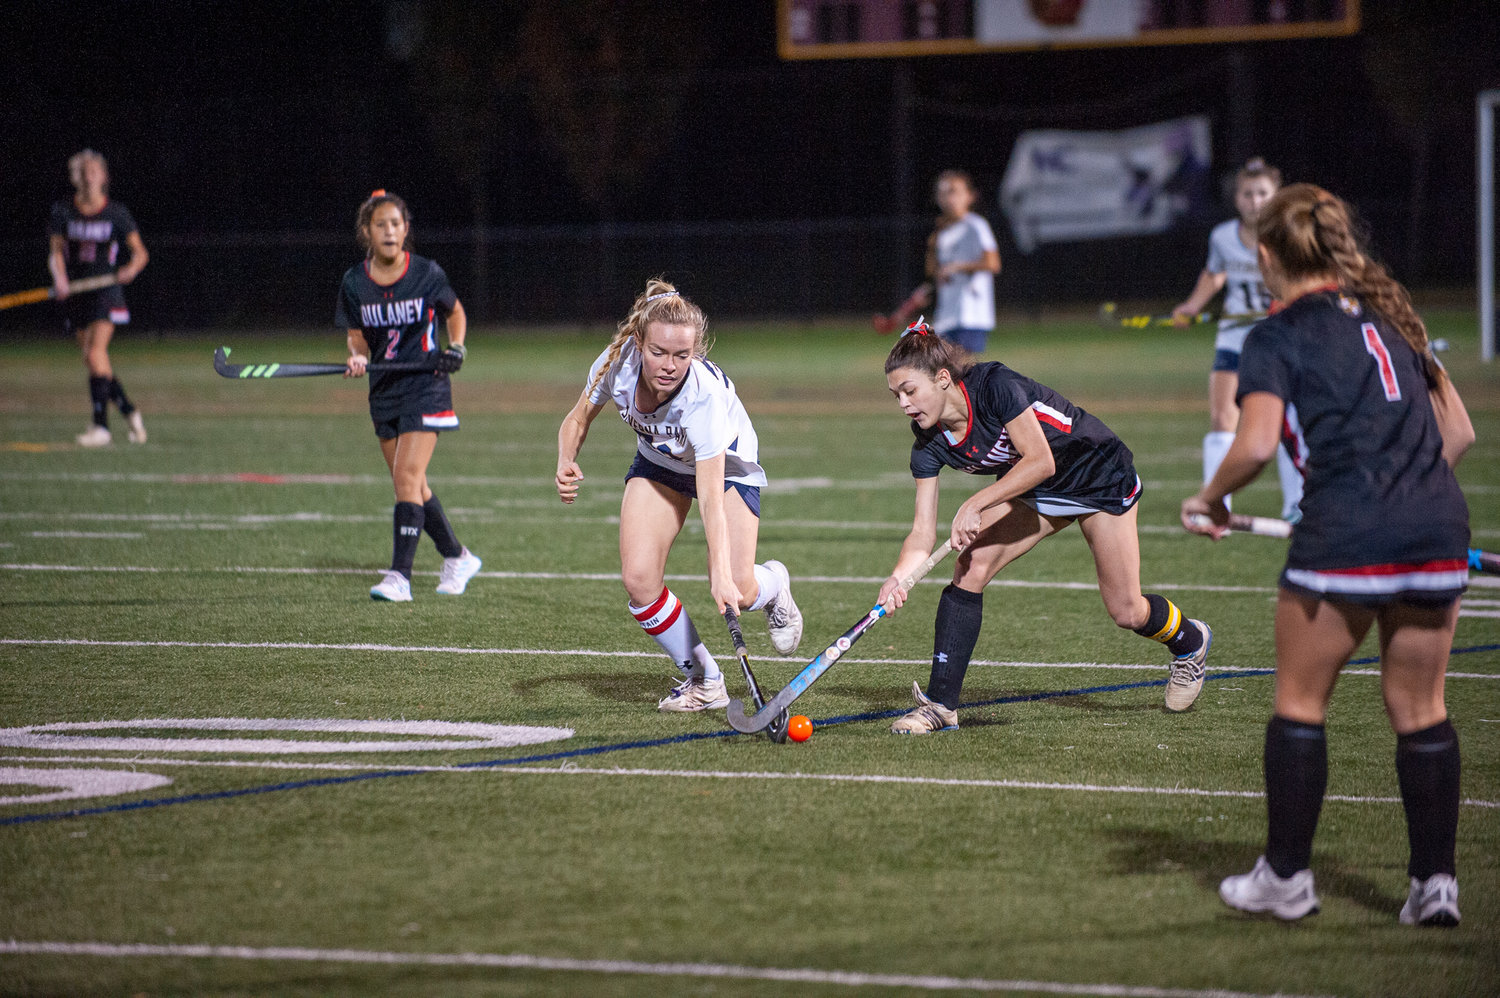 Midfielder Gen Mullervy played stellar defense and added a score in Severna Park's 4-1 win over Dulaney on November 9.